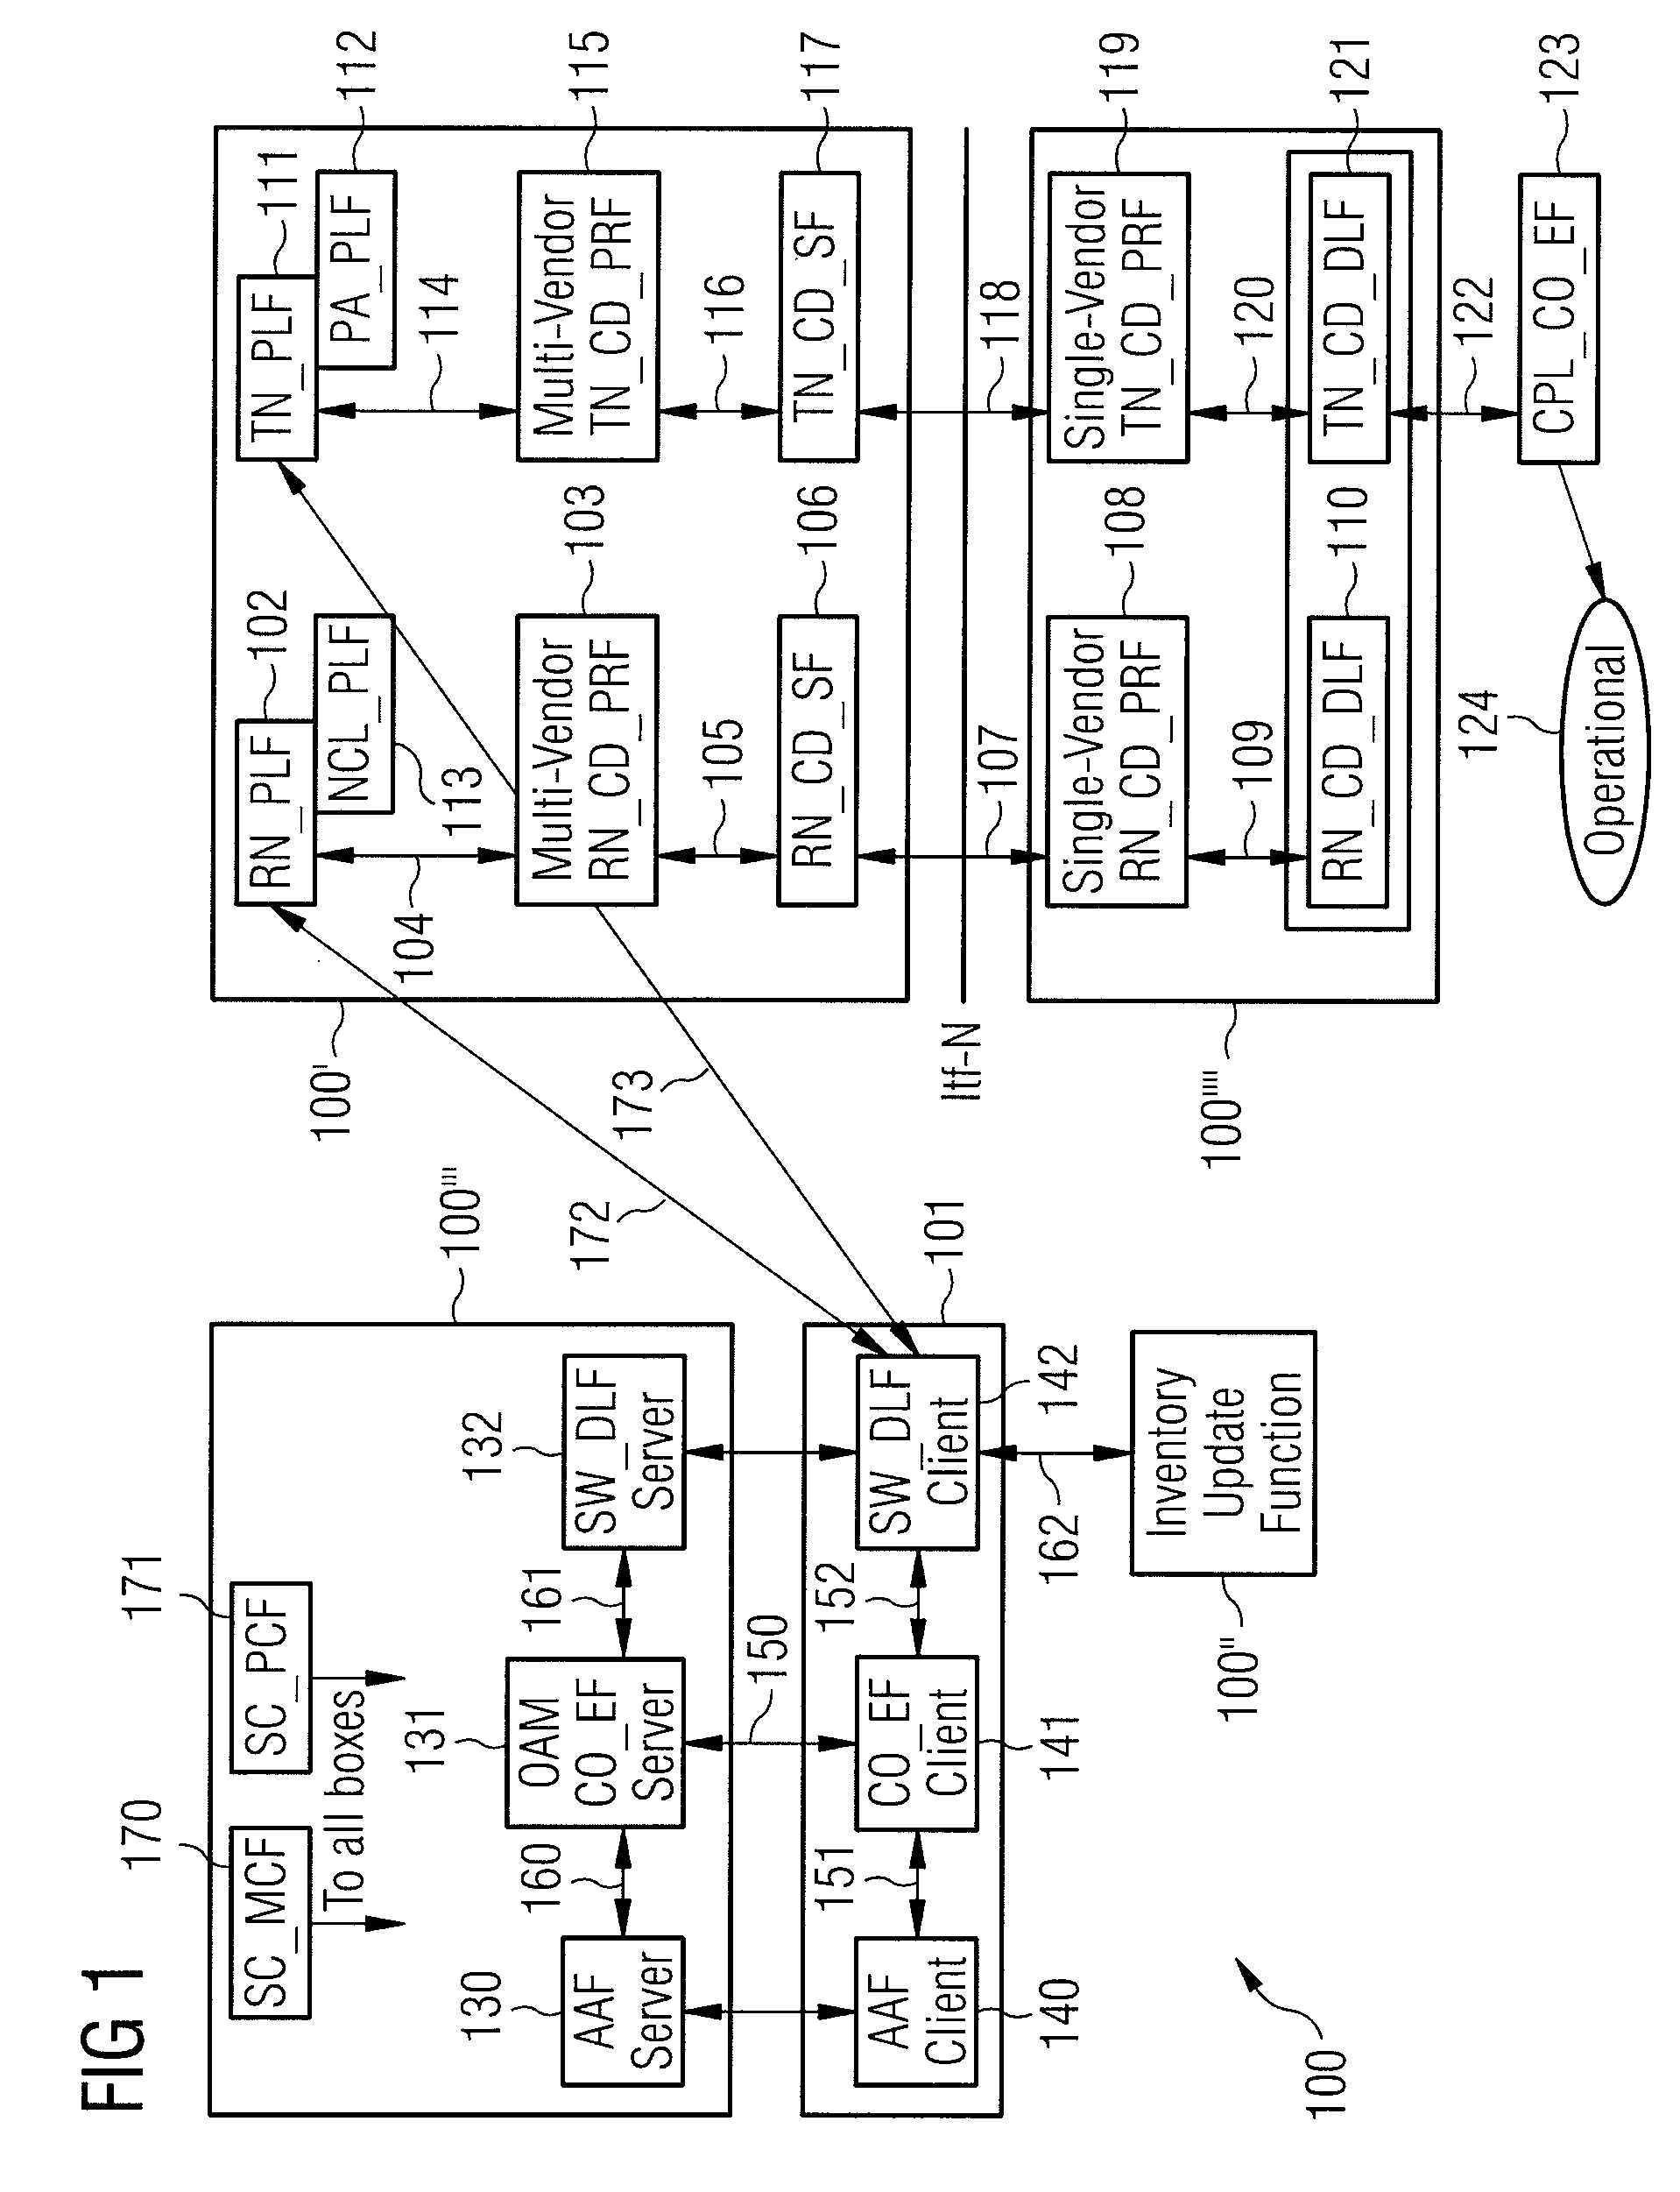 Integration apparatus, communication network and method for integrating a network node into a communication network